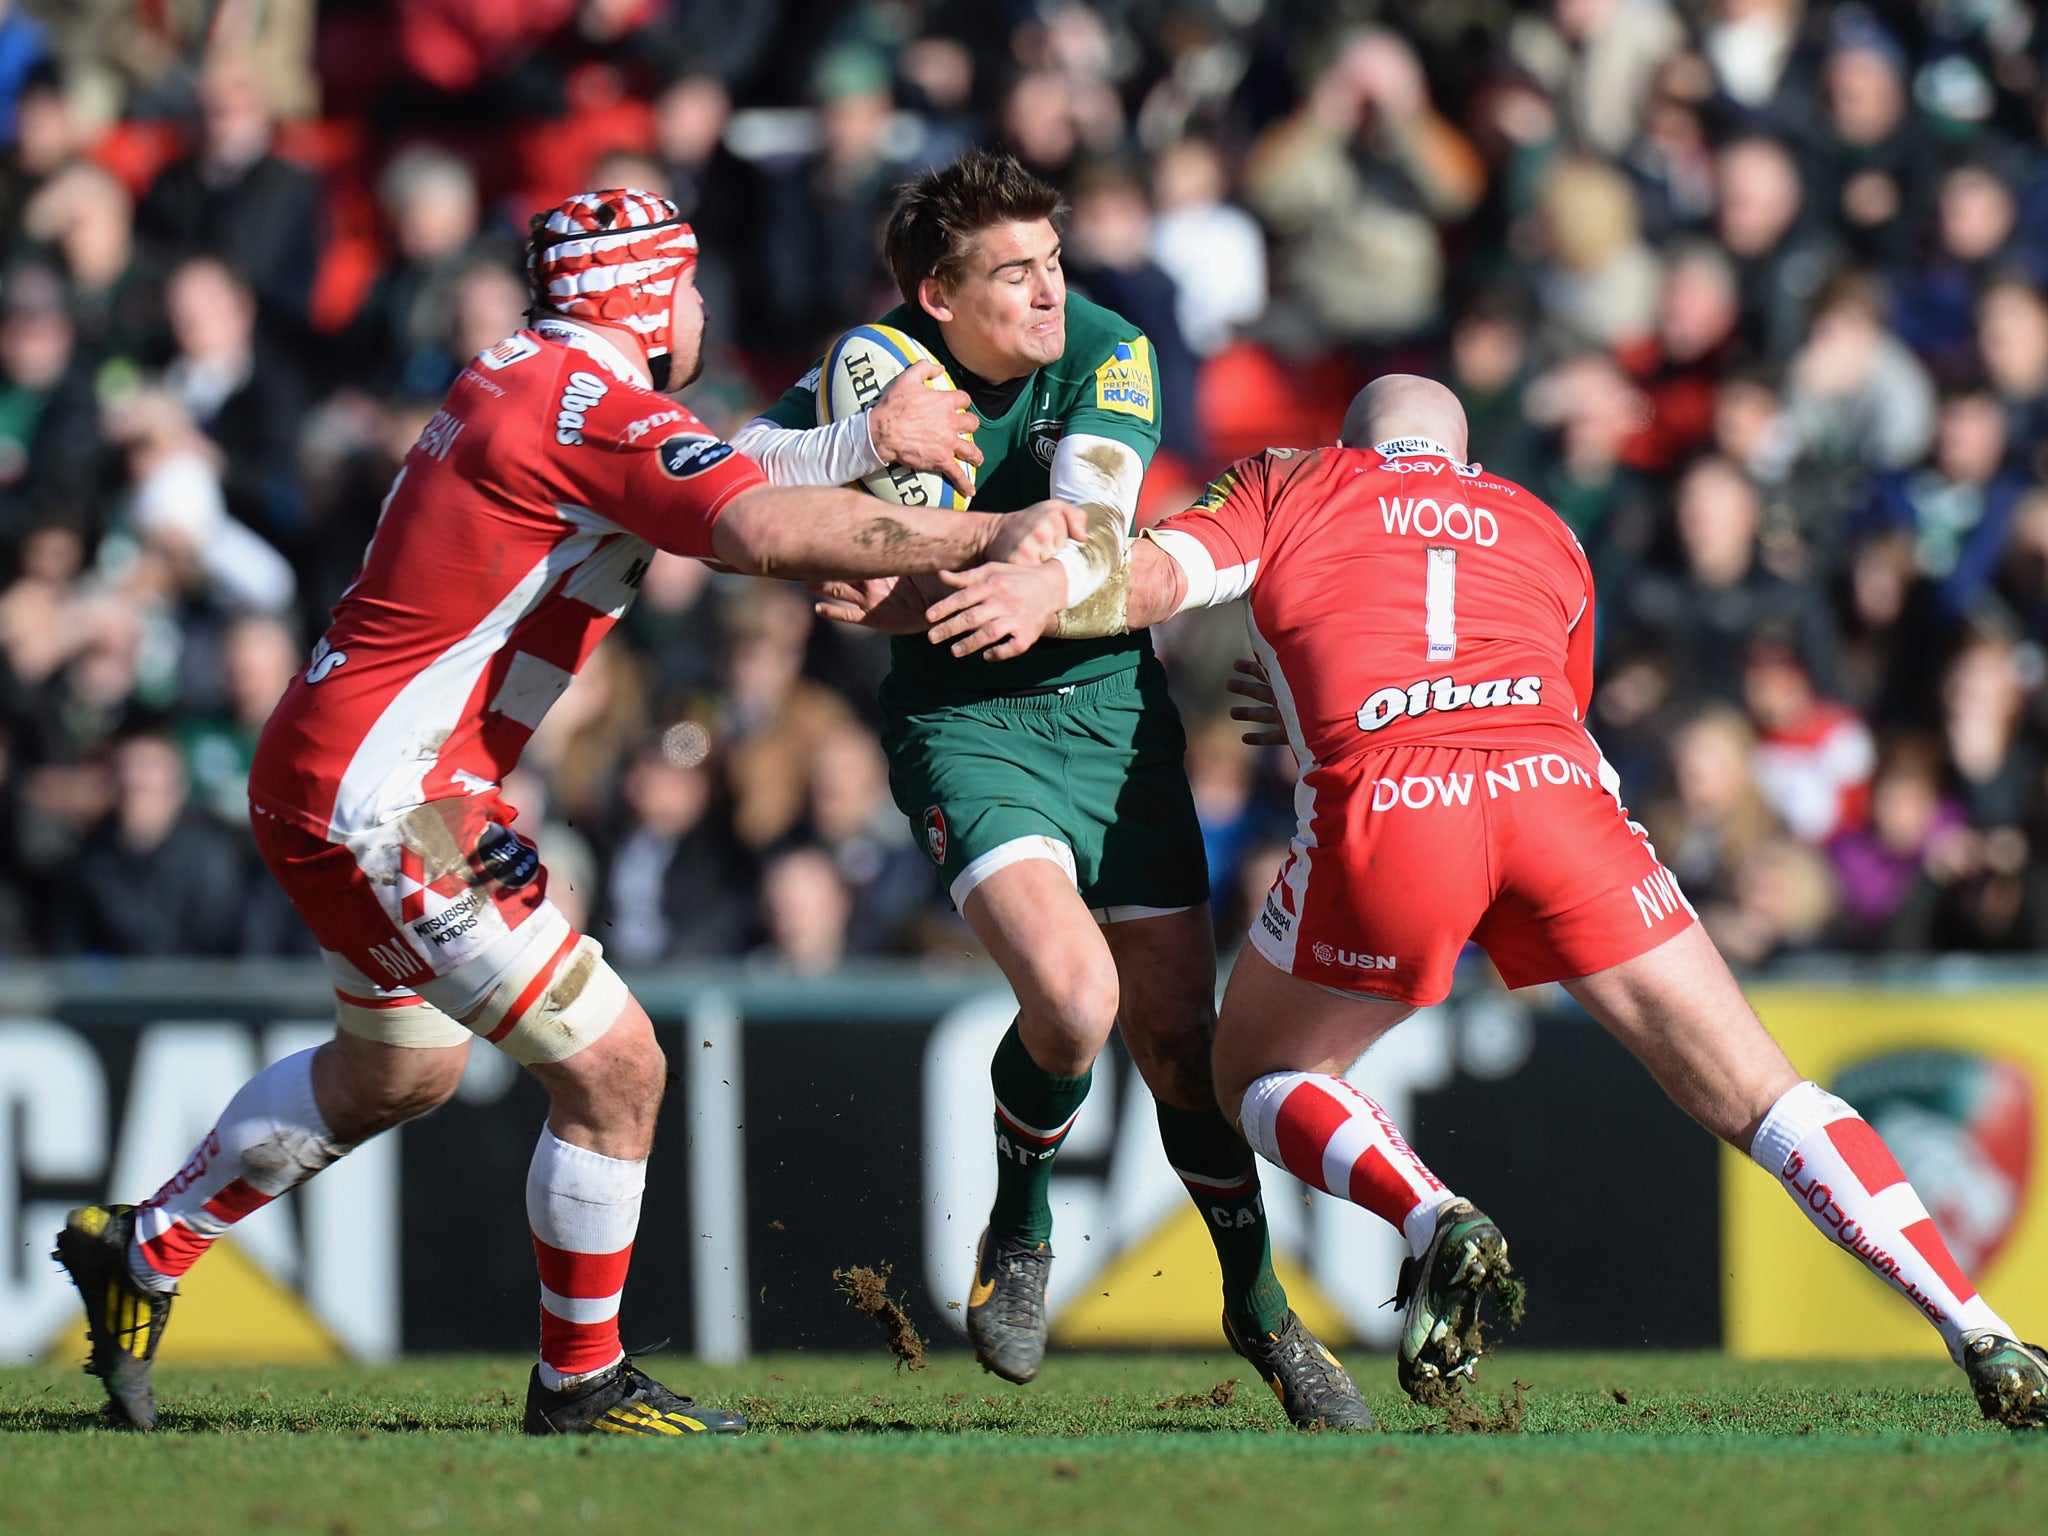 Toby Flood of Leicester Tigers tackled by Ben Morgan (left) and Nick Wood (right) of Gloucester